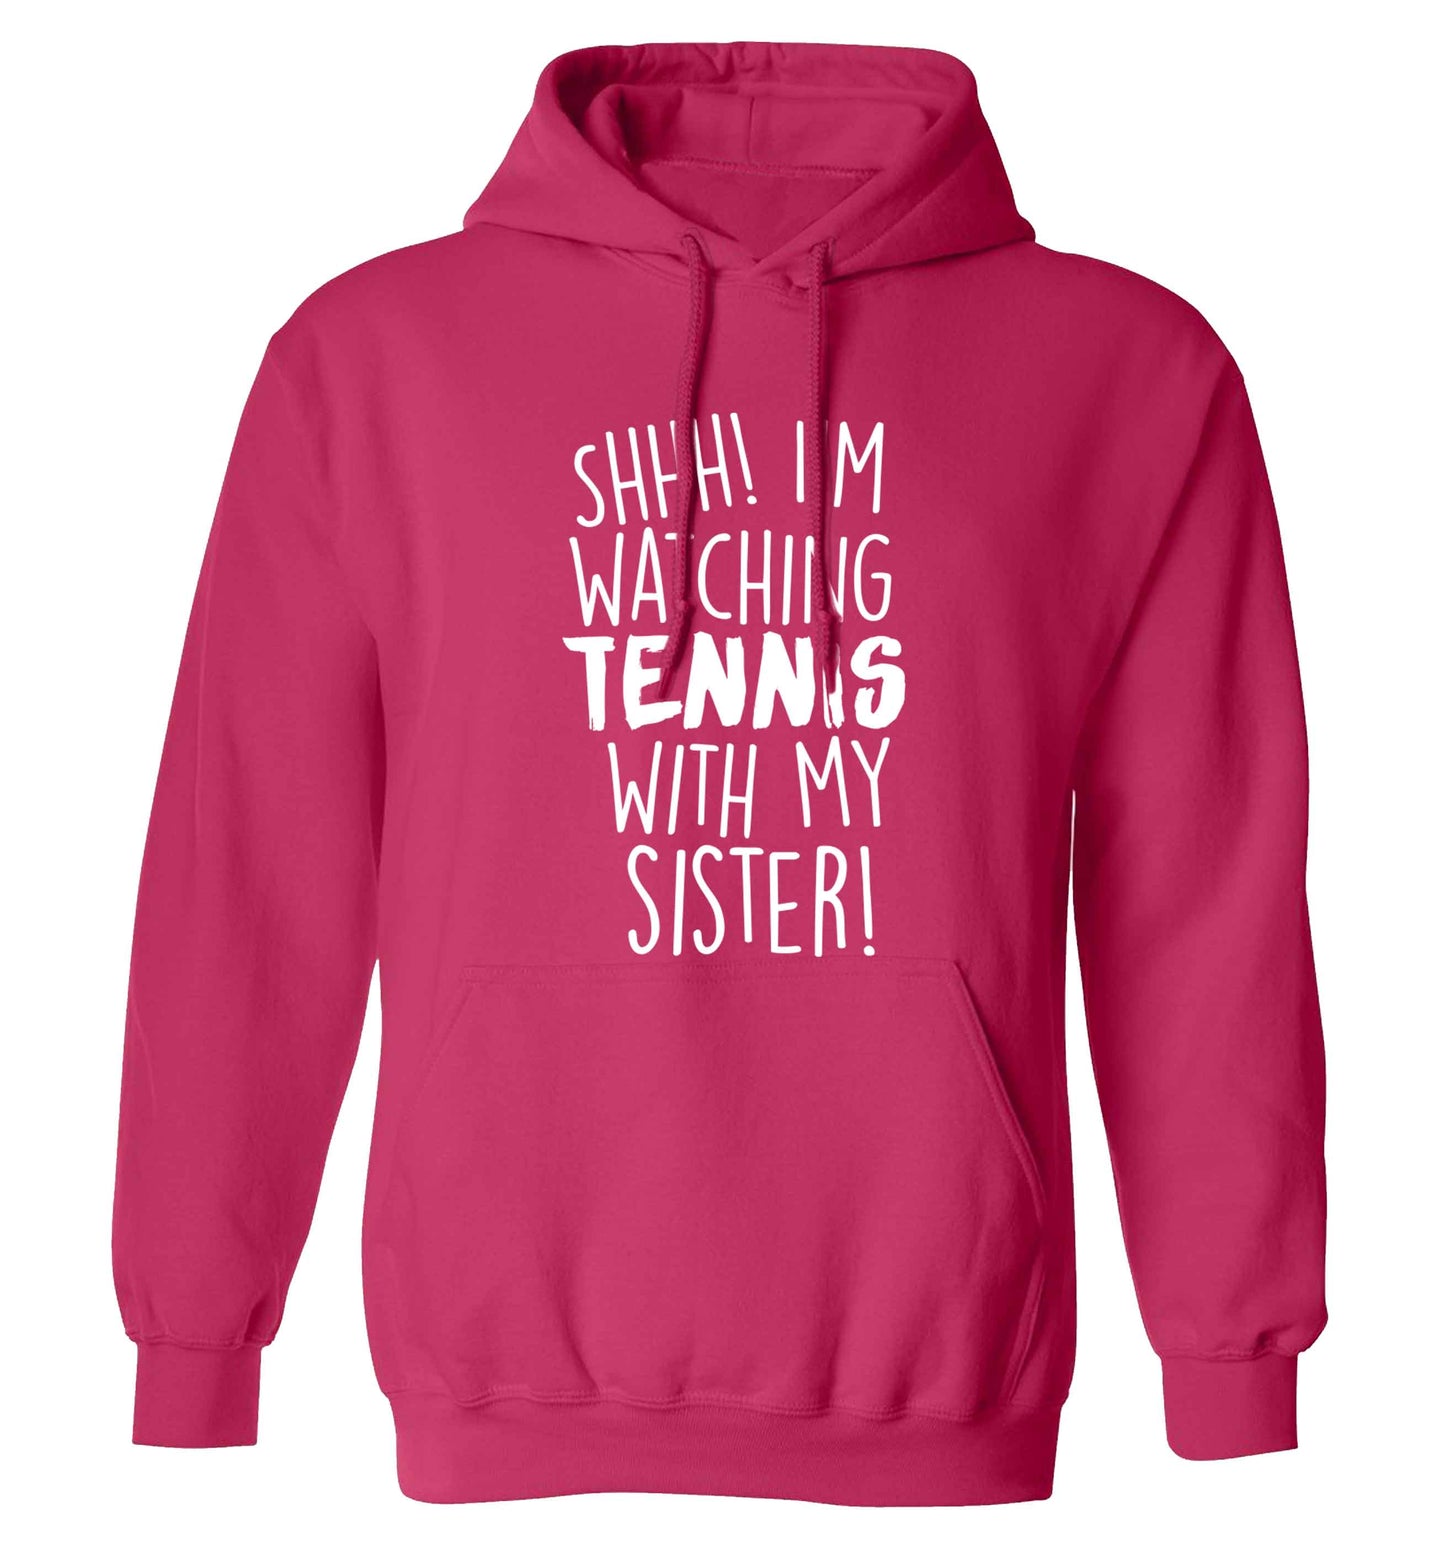 Shh! I'm watching tennis with my sister! adults unisex pink hoodie 2XL